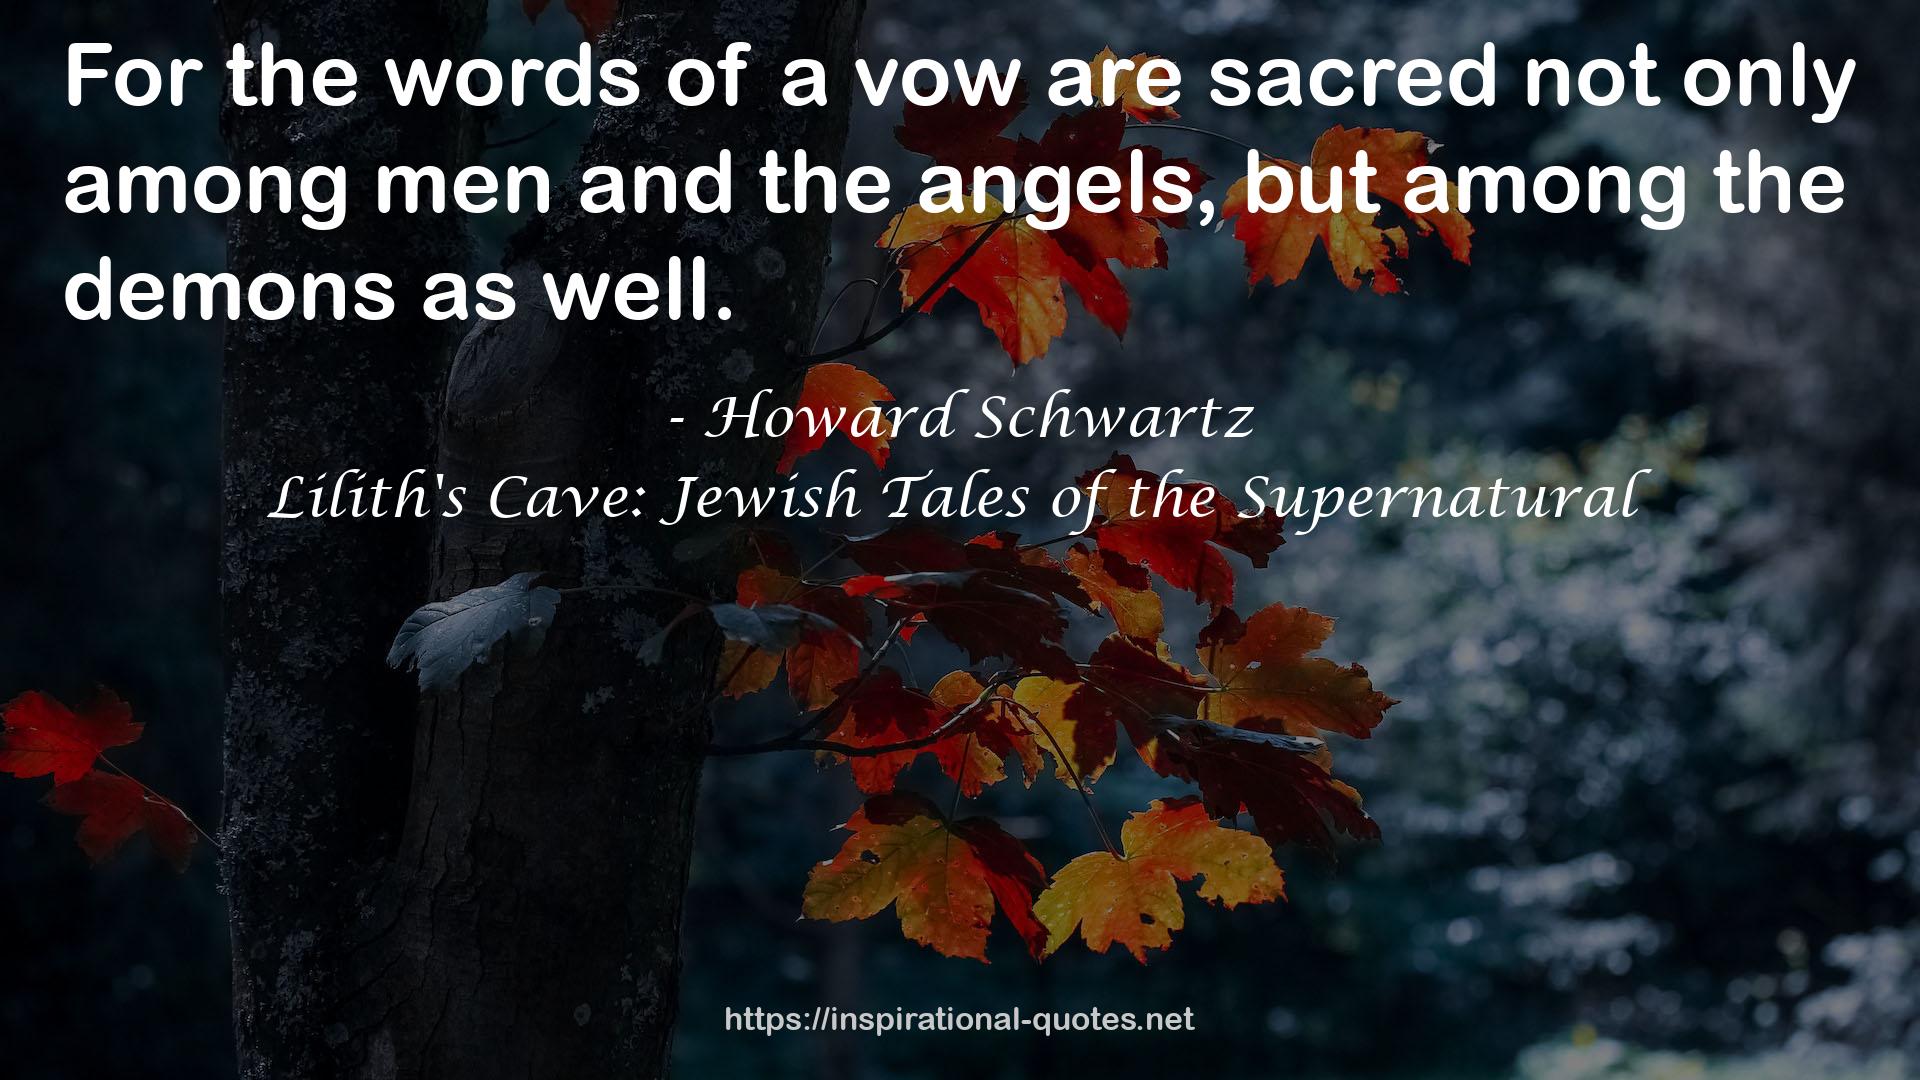 Lilith's Cave: Jewish Tales of the Supernatural QUOTES